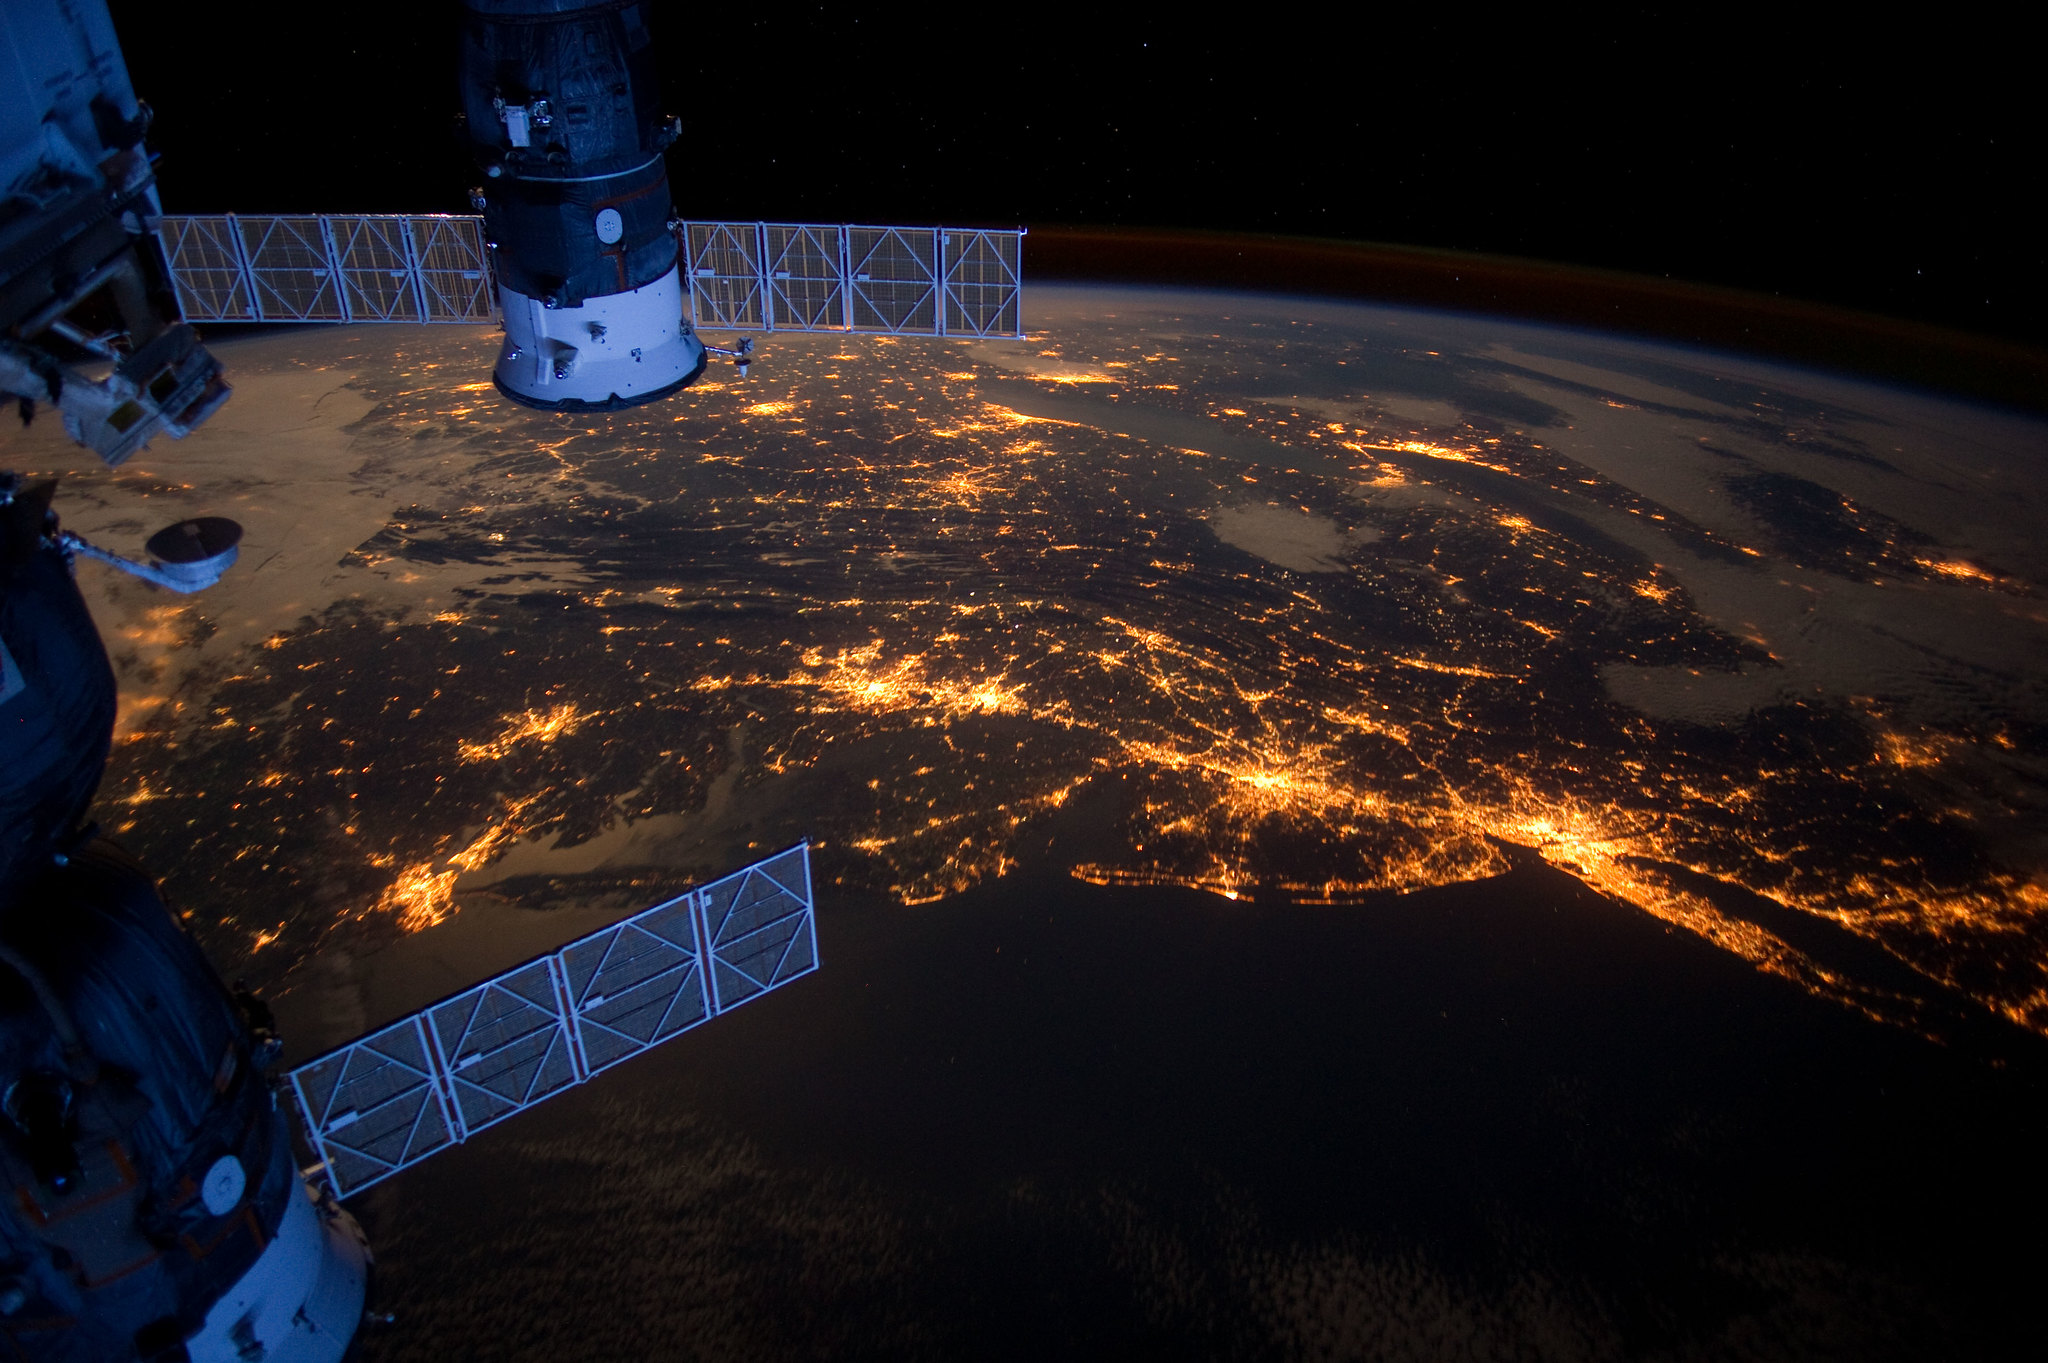 A view of the Eastern US from space.